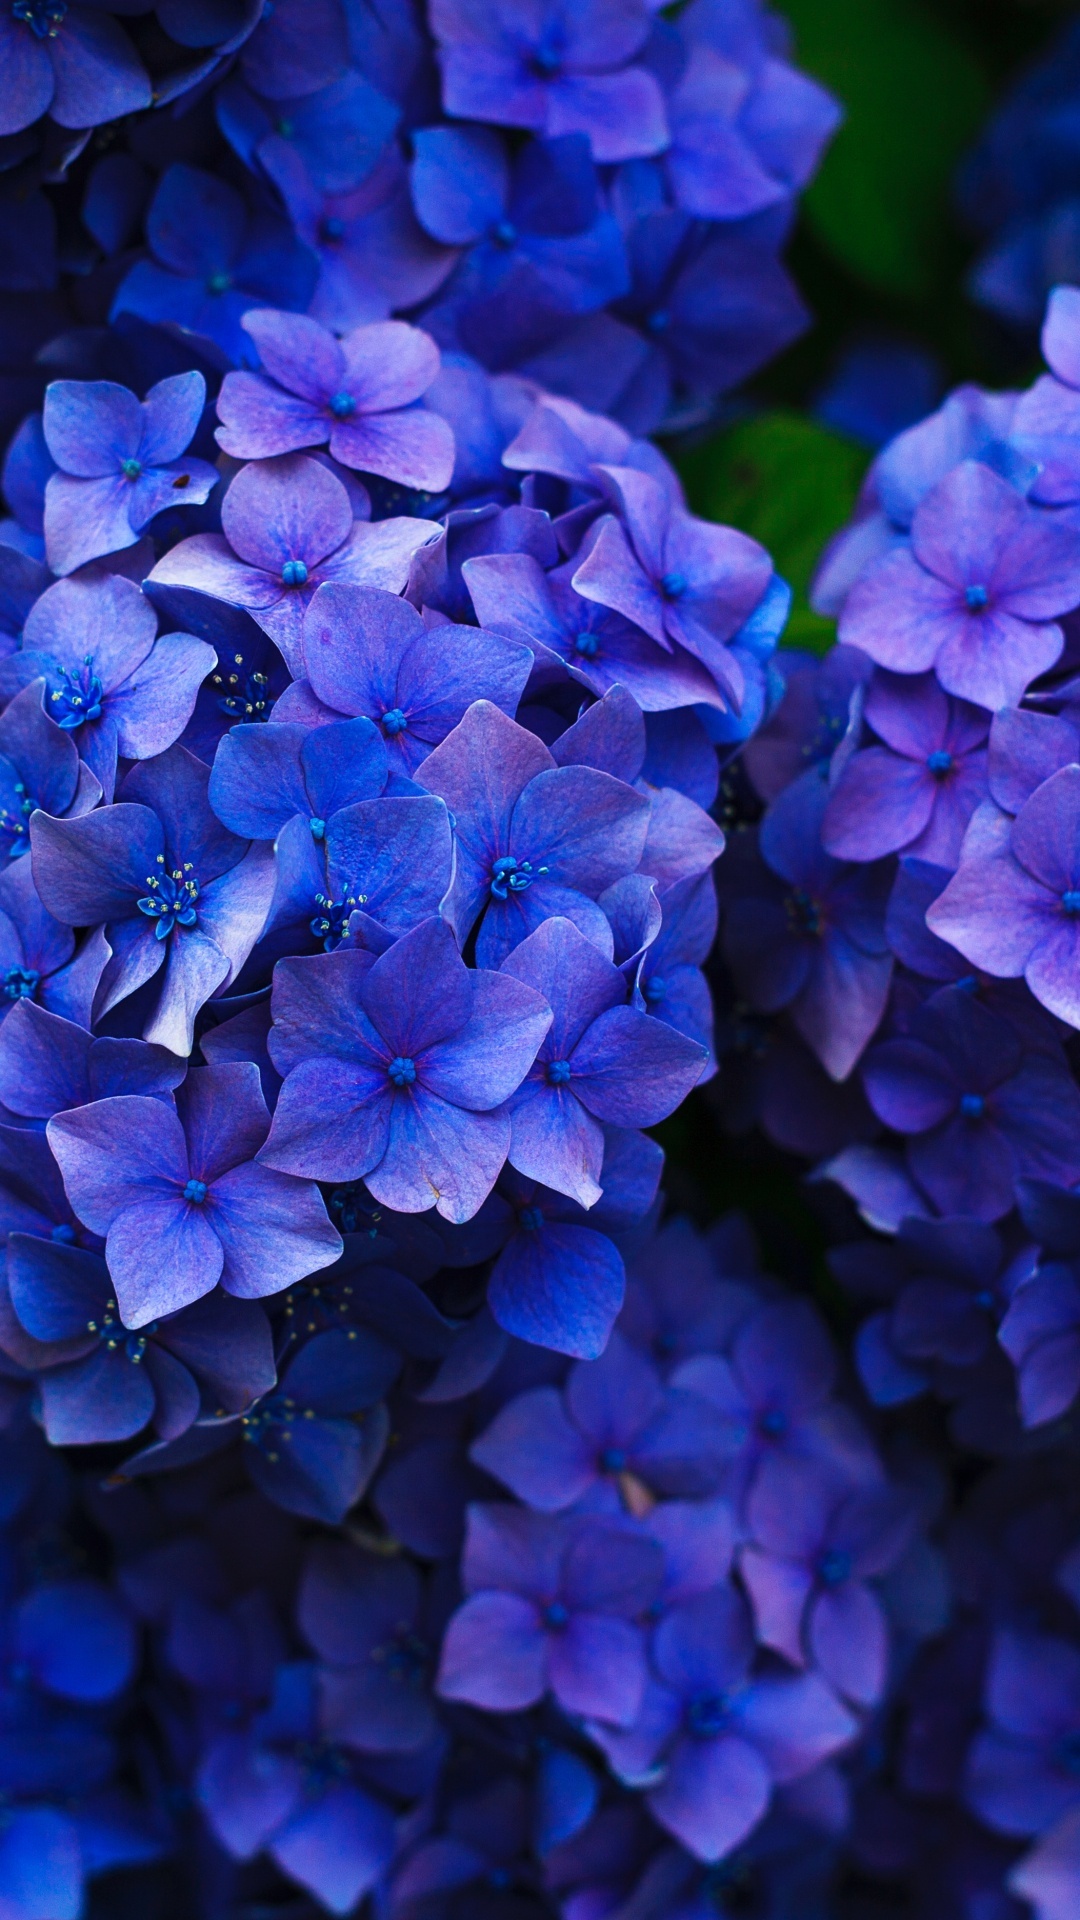 Hydrangea wallpapers, Android mobile, Full HD, Floral beauty, 1080x1920 Full HD Handy